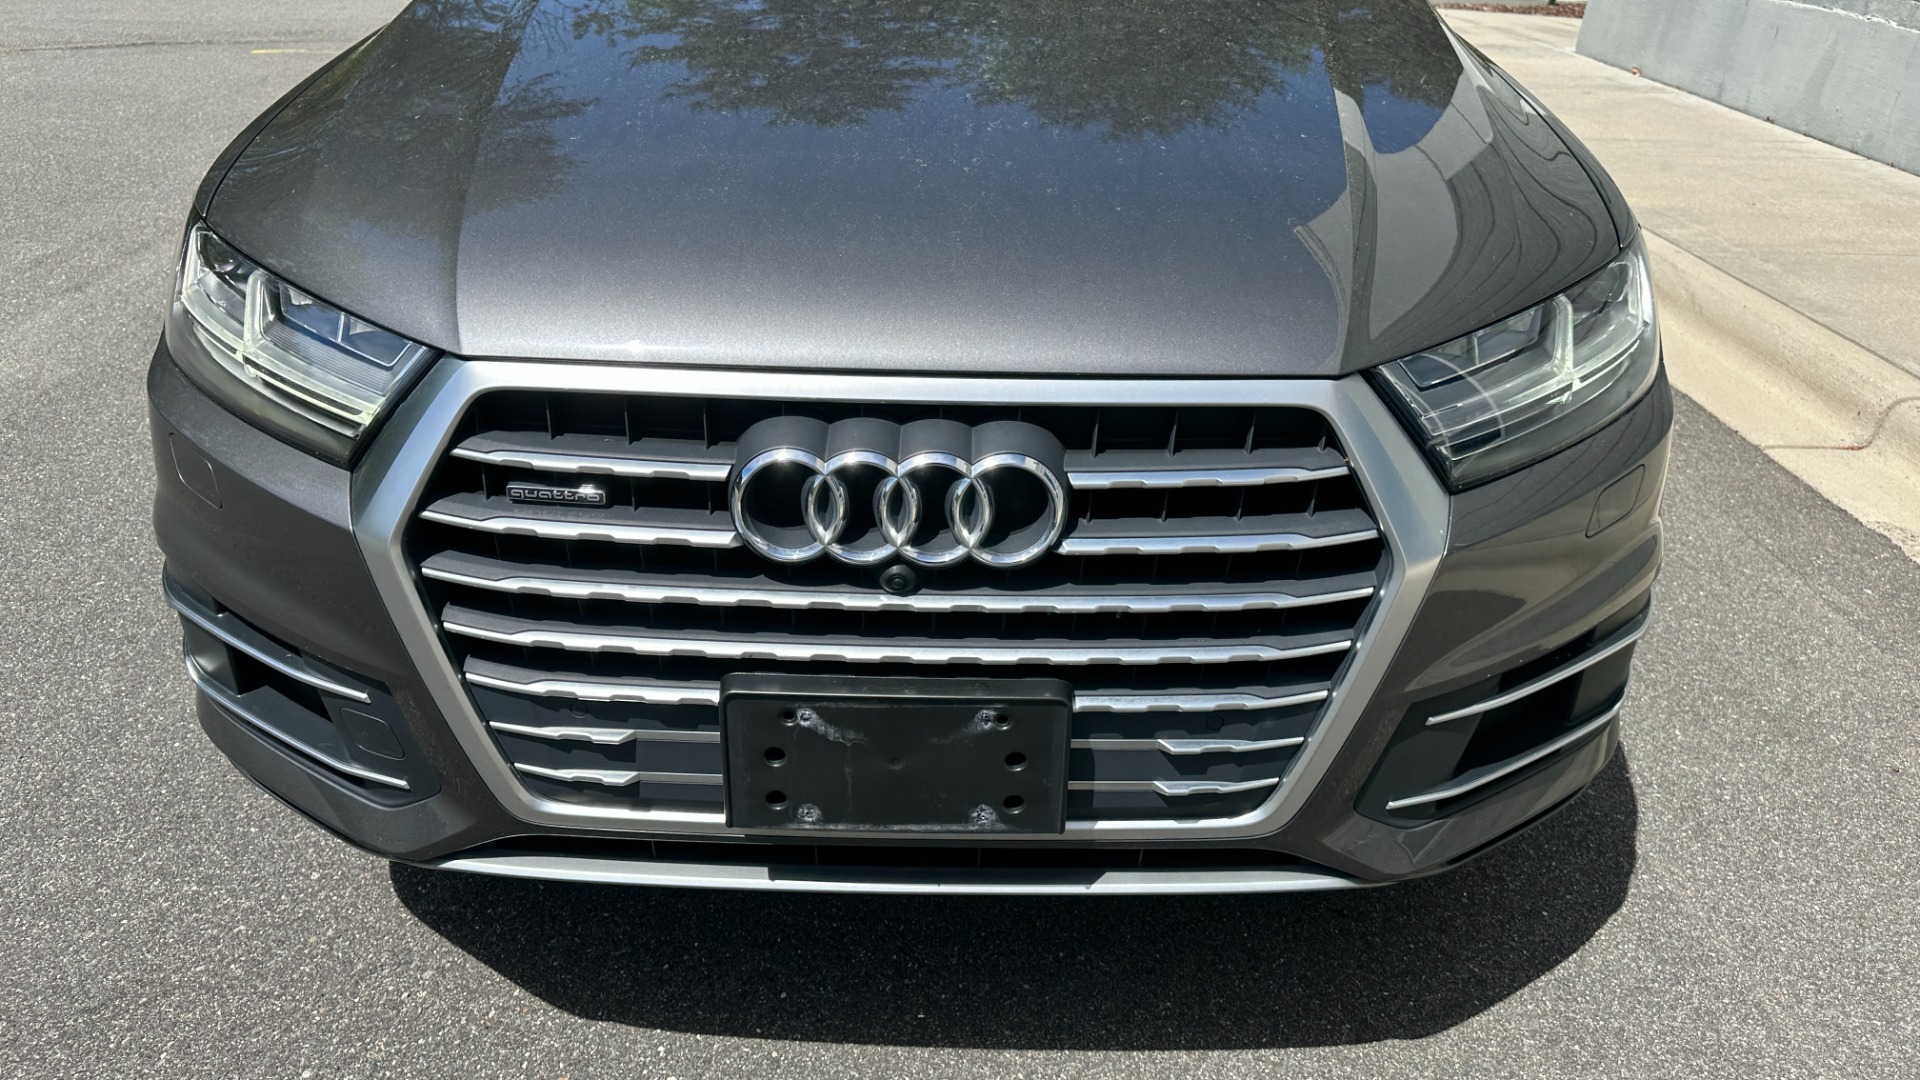 Used 2019 Audi Q7 PREMIUM PLUS / COLD WEATHER PACKAGE / LEATHER / SUNSHADES / NAV for sale Sold at Formula Imports in Charlotte NC 28227 8